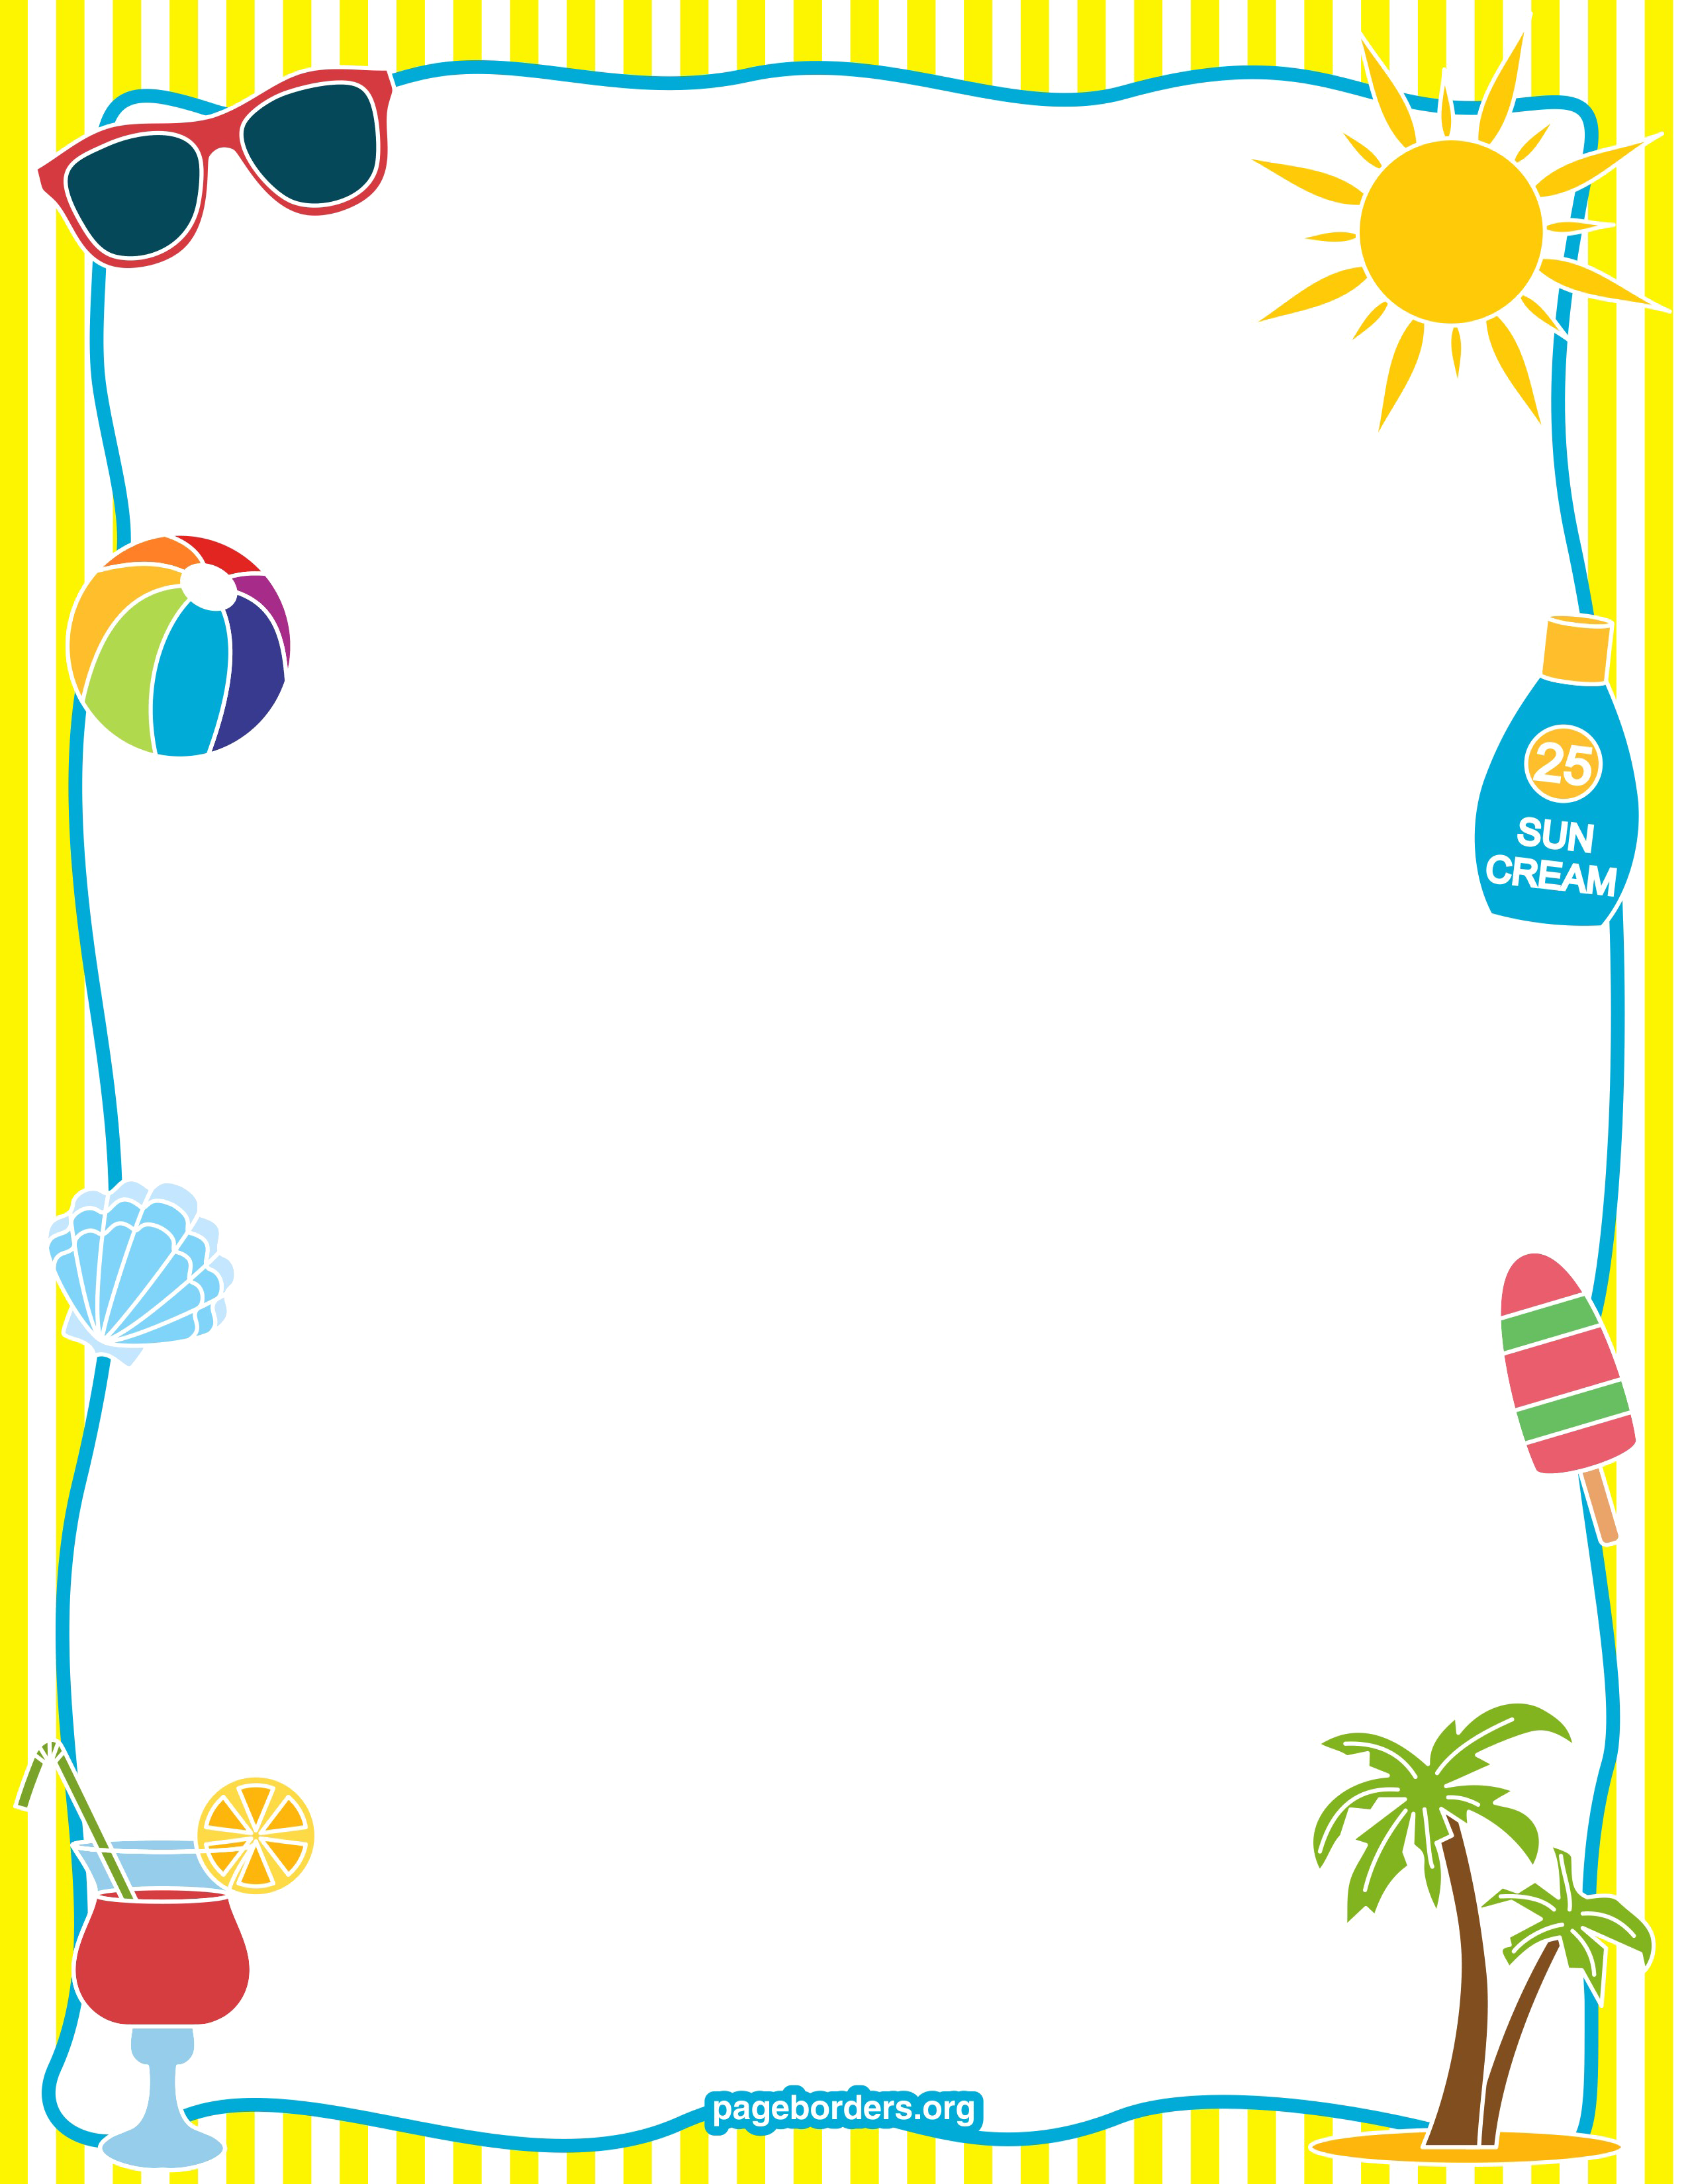 School Border Image PNG Image High Quality PNG Image